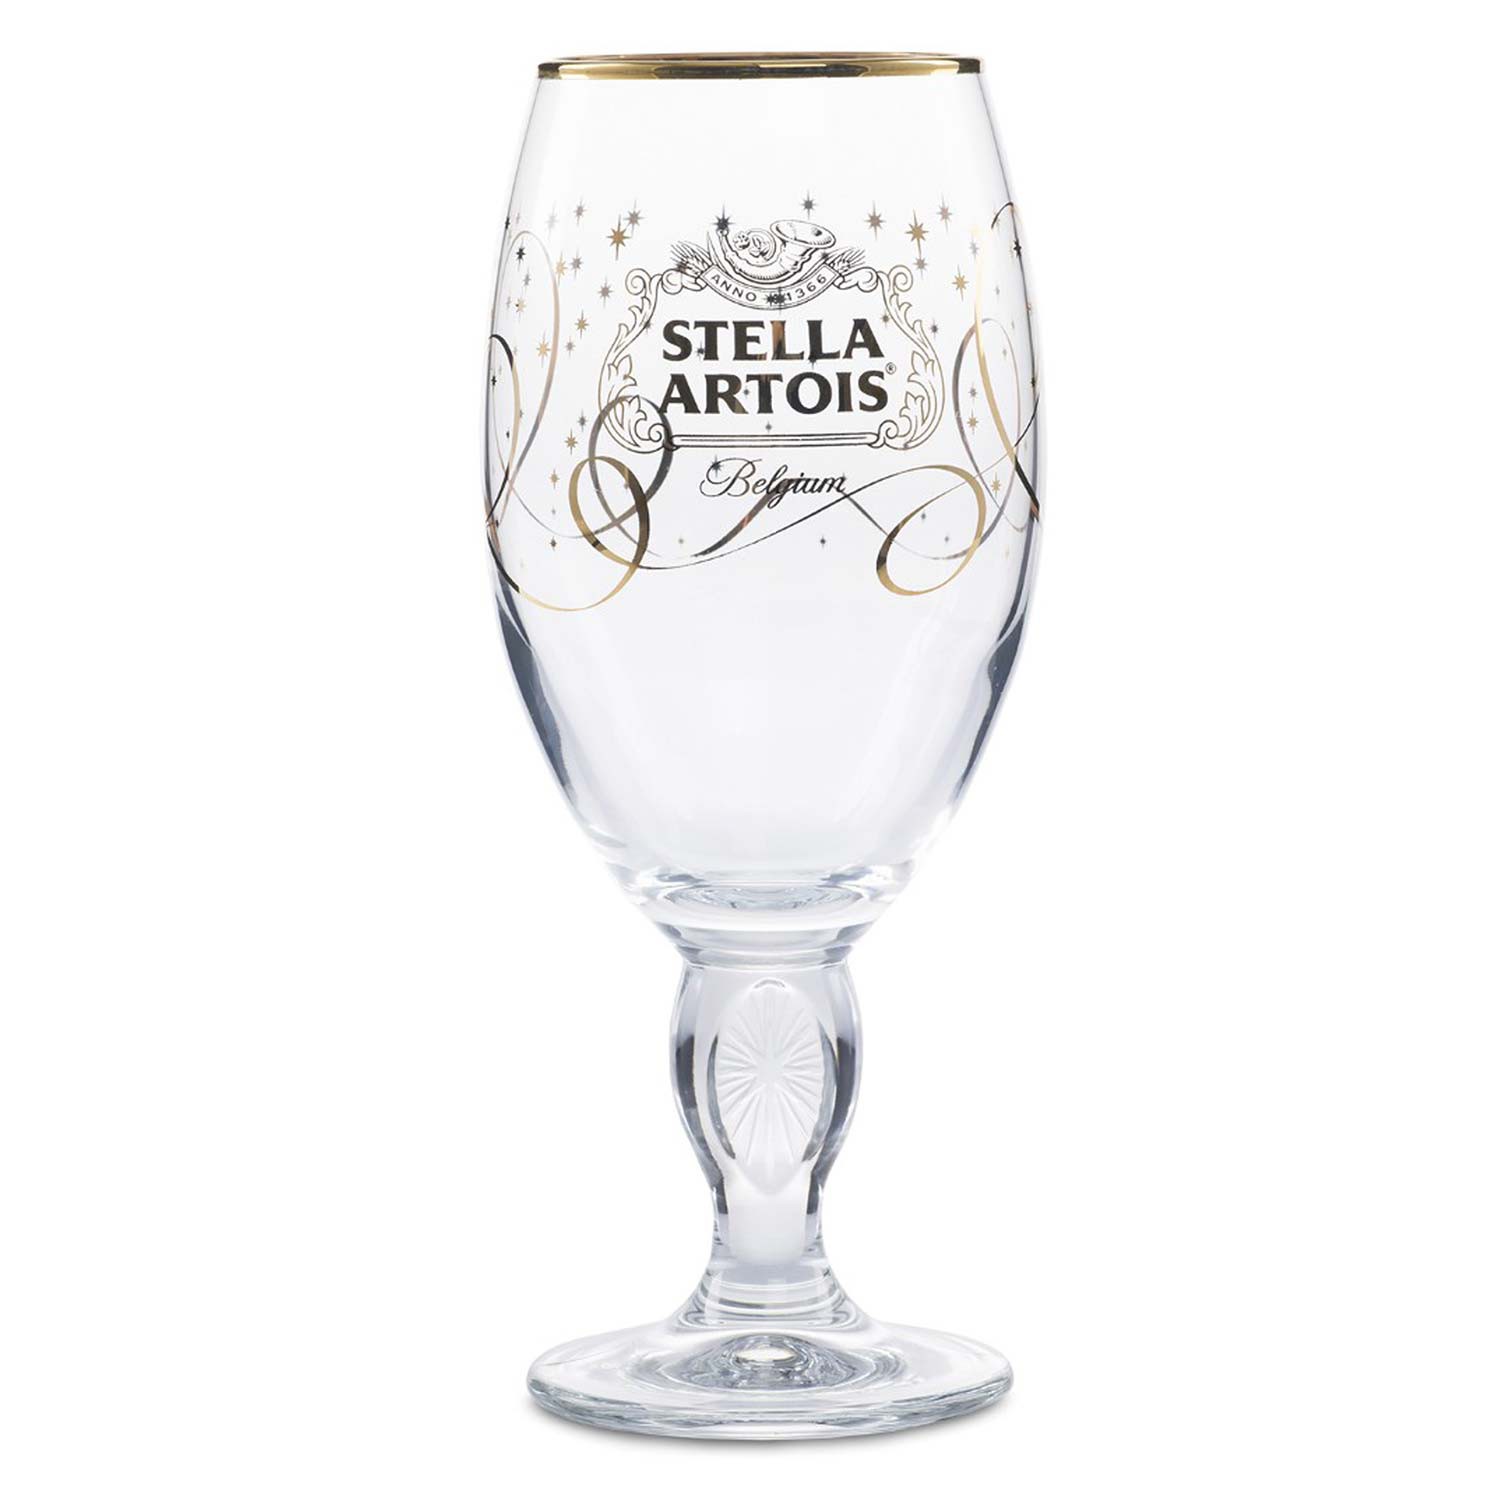 Keep the Chalice with Stella Artois – Calumet Breweries